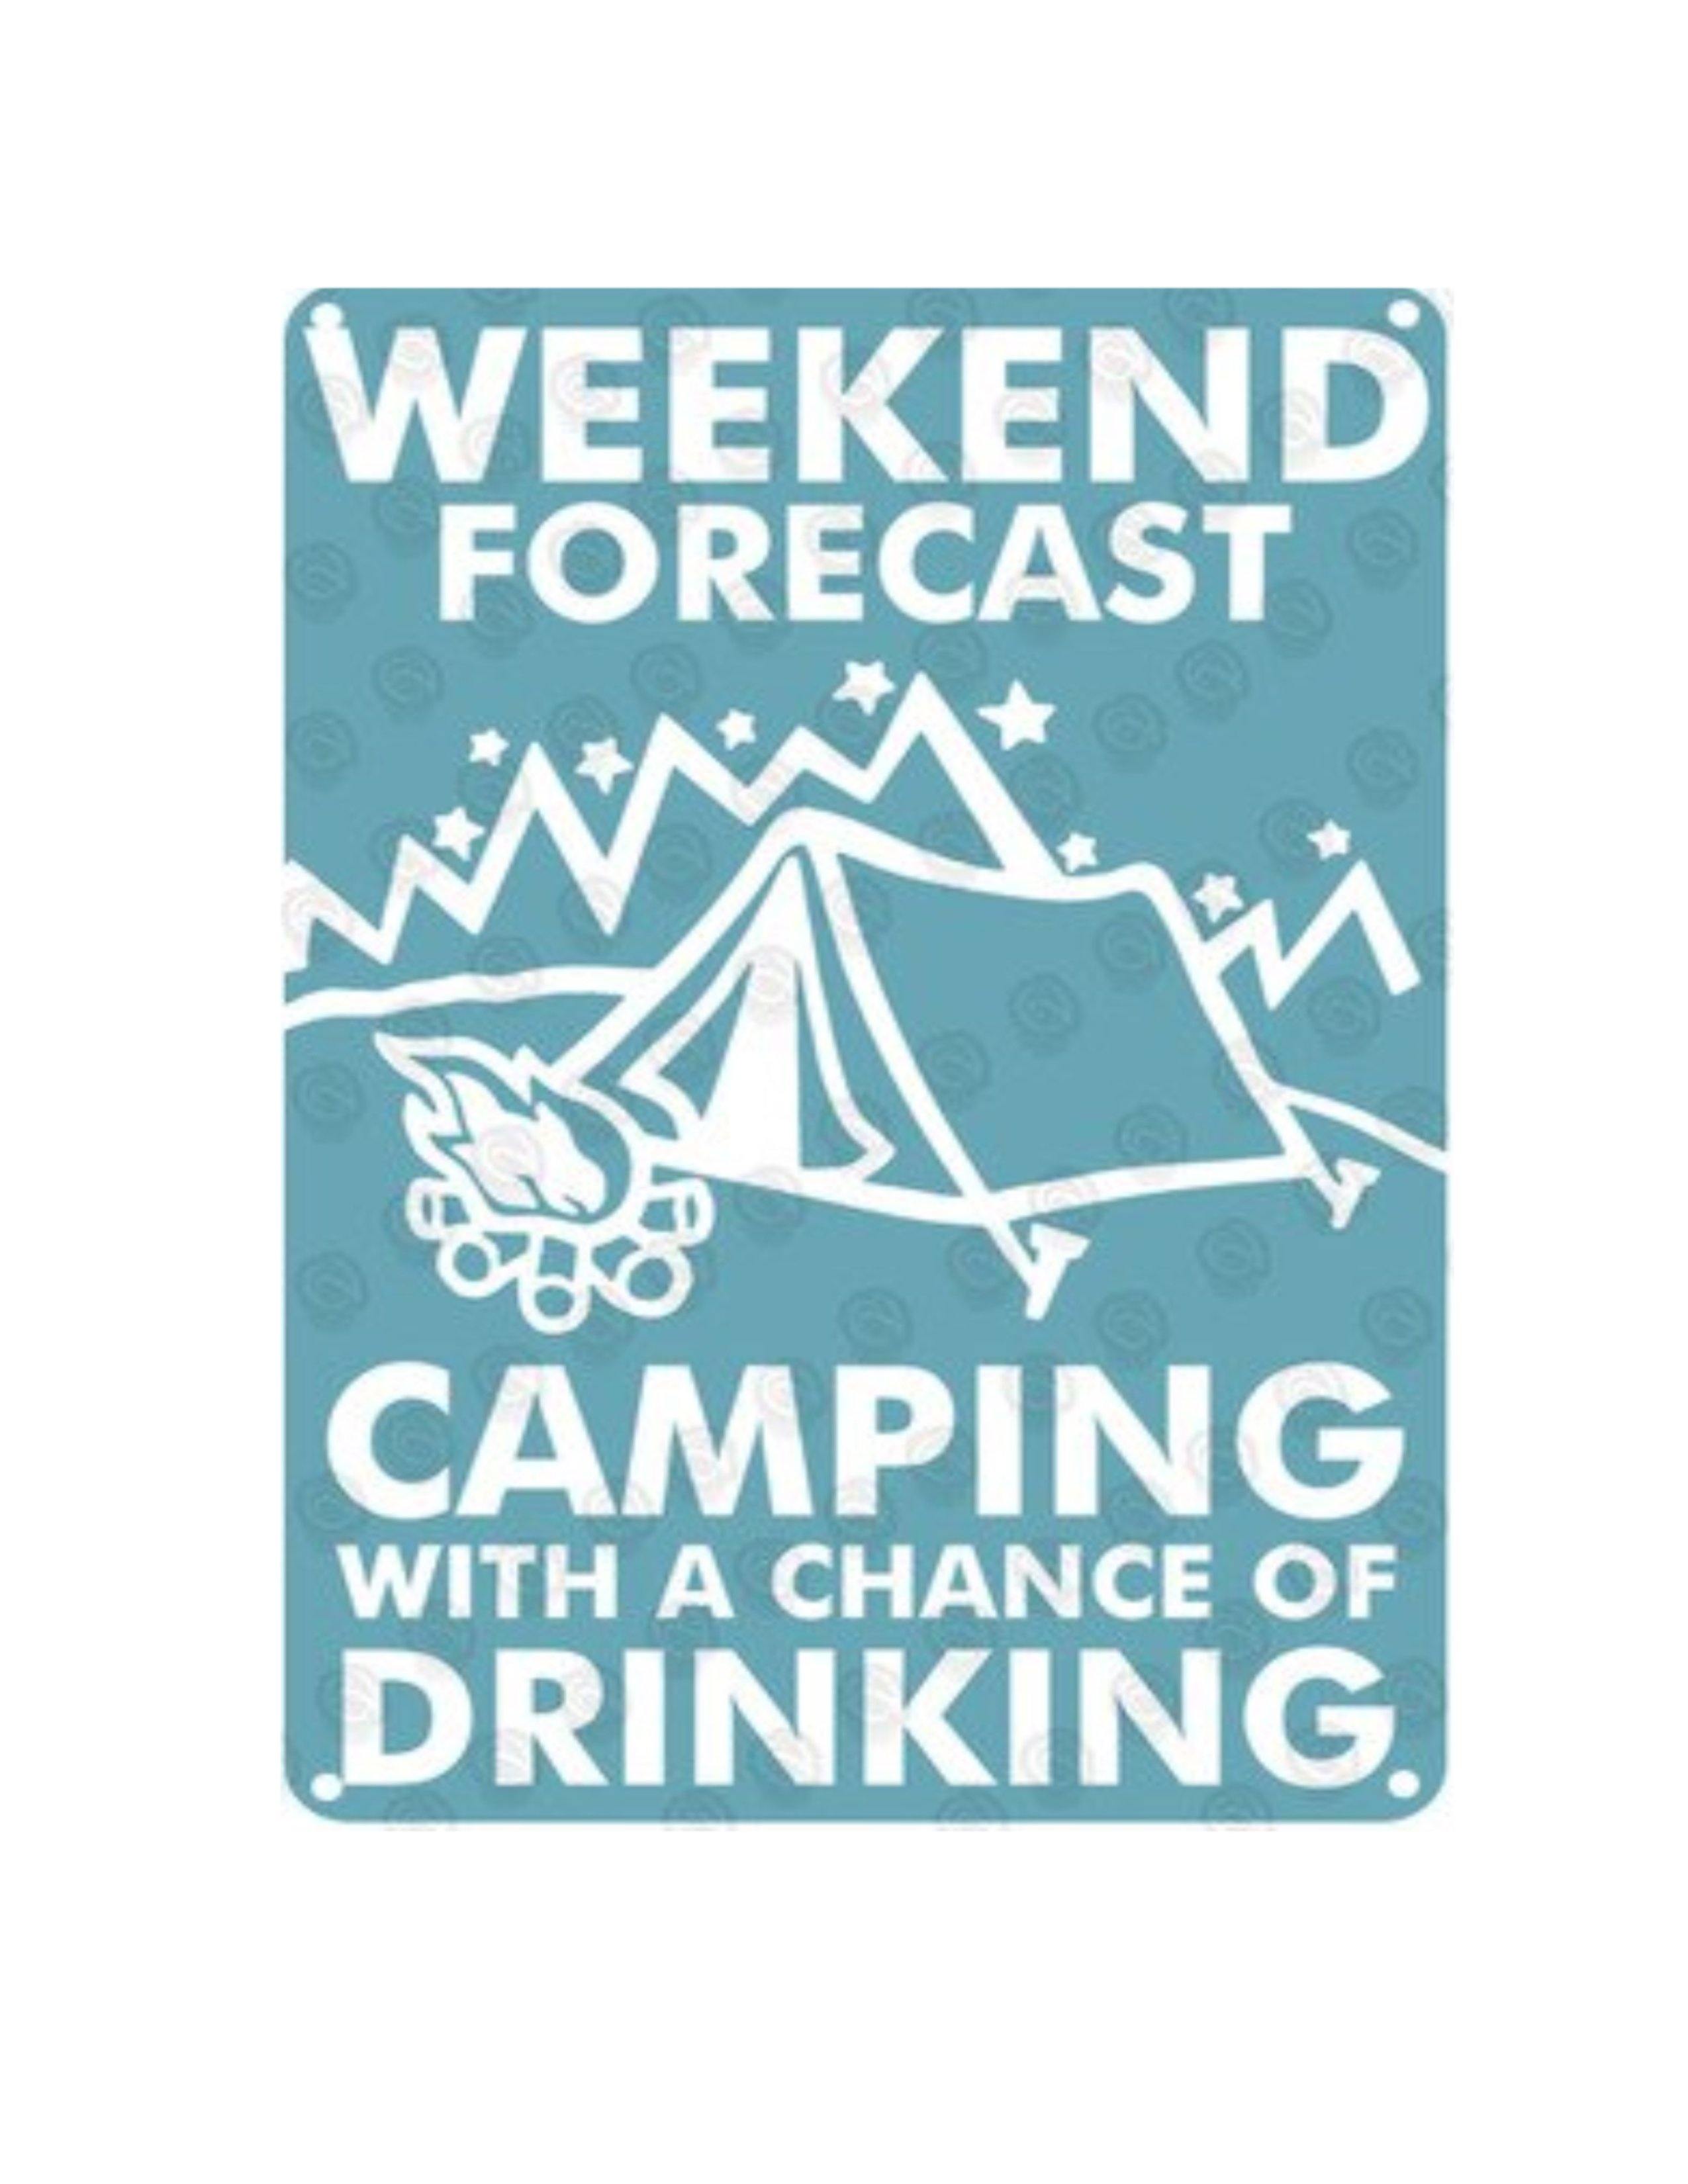 Metal Tin Sign - Weekend Forecast Camping With A Chance Of Drinking - Leapfrog Outdoor Sports and Apparel